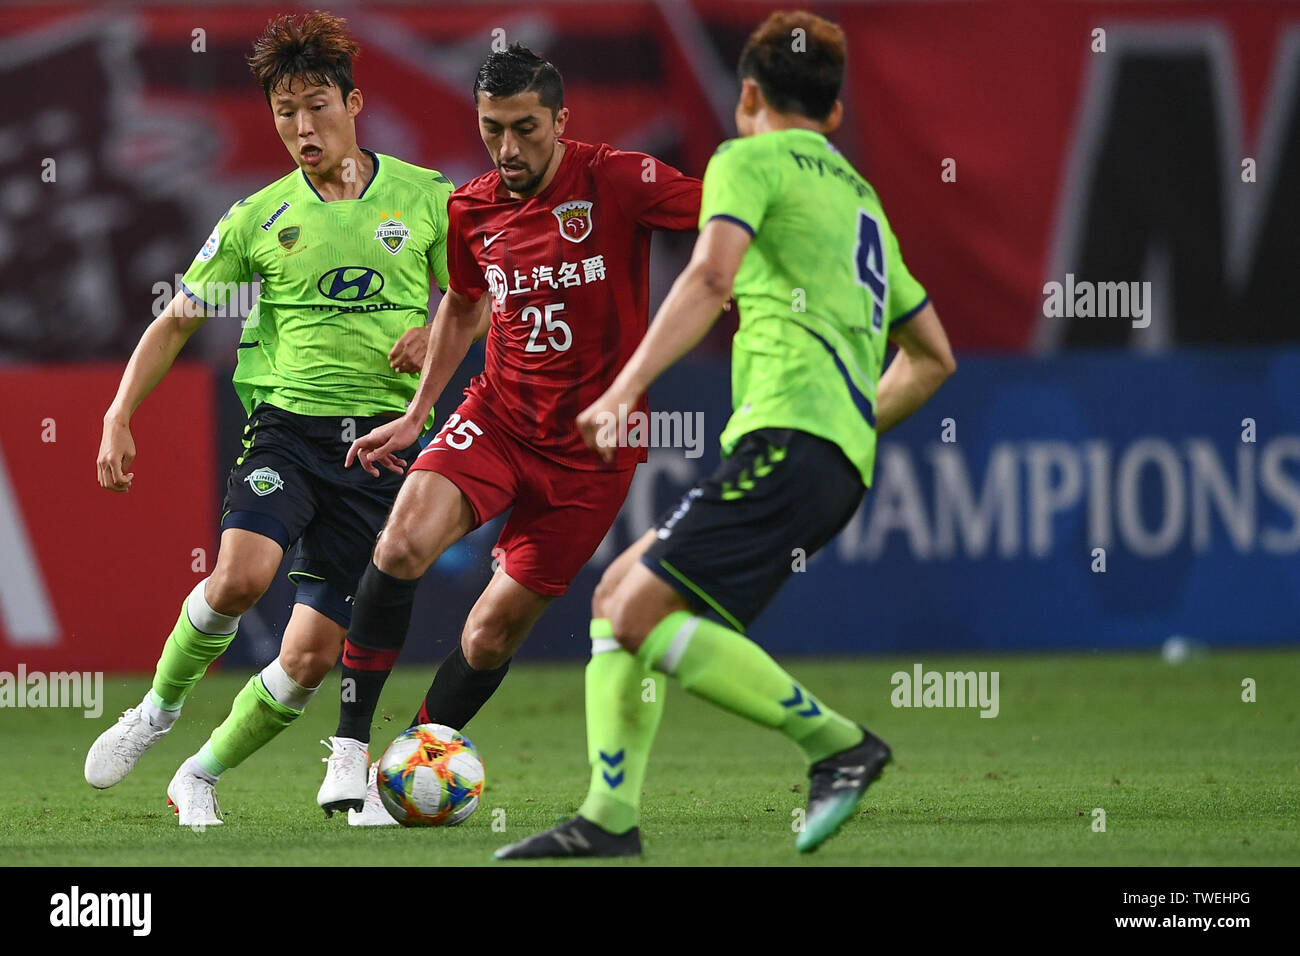 Uzbek football player Odil Ahmedov, center, of China's Shanghai SIPG F.C. passes the ball against players of South Korea's Jeonbuk Hyundai Motors FC in the eighth-final match during the 2019 AFC Champions League in Shanghai, China, 19 June 2019. Two-time champions Jeonbuk Hyundai Motors will take an advantage into the second leg of their 2019 AFC Champions League (ACL) Round of 16 game with Shanghai SIPG FC next week after netting an away goal in their 1-1 draw in Shanghai on Wednesday. Stock Photo